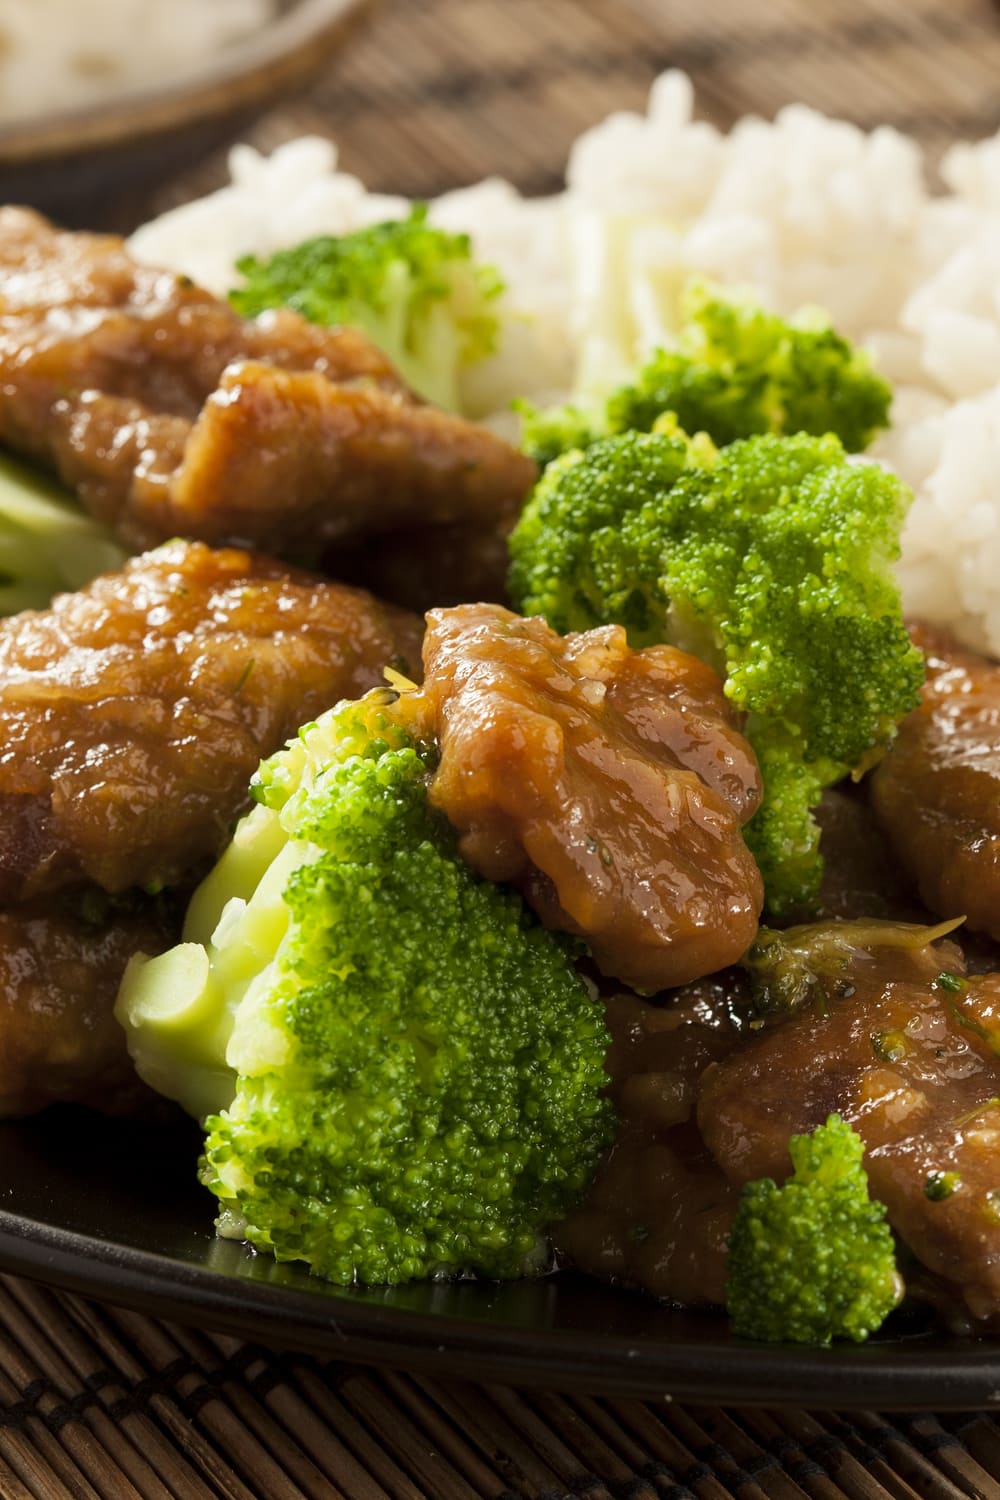 Beef and Broccoli with sauce served with white rice.